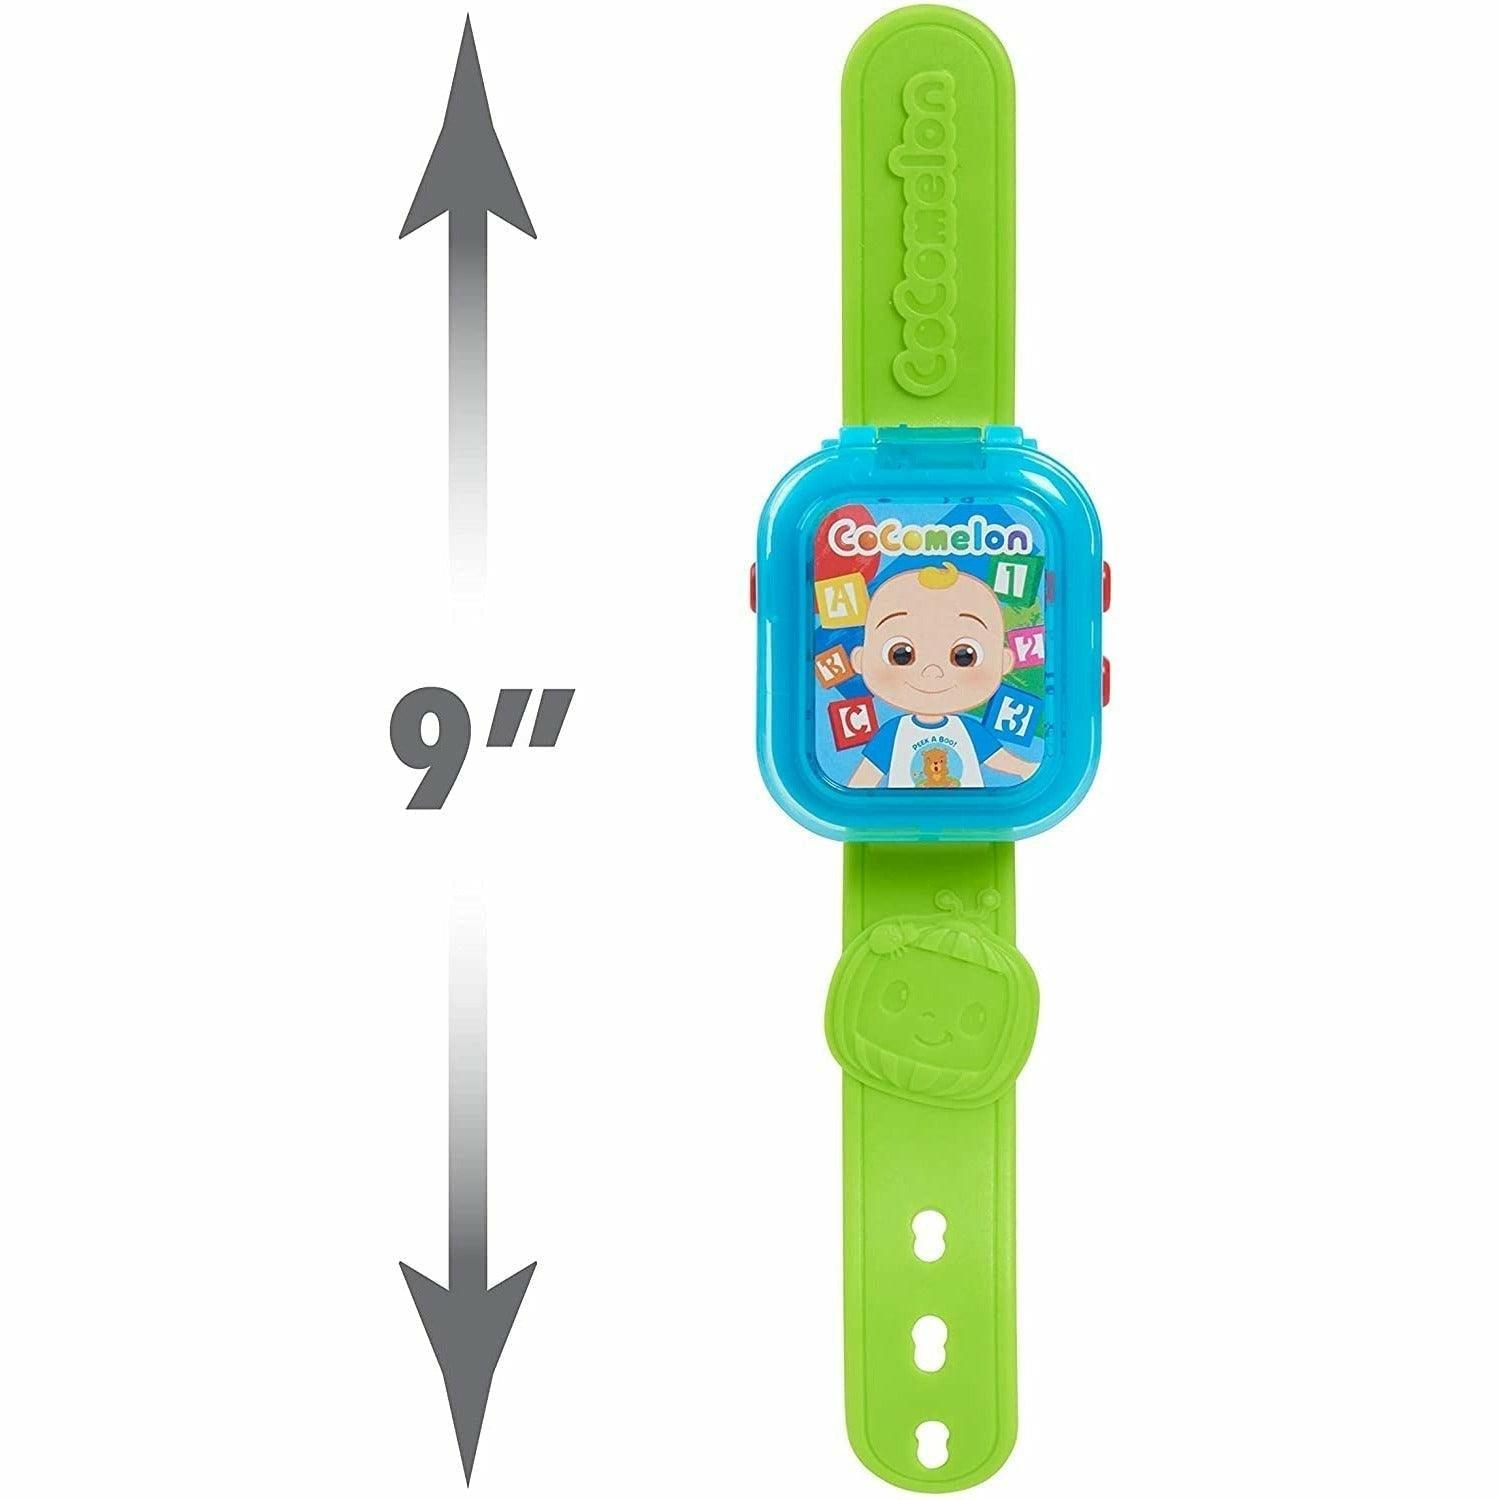 CoComelon JJ’s Learning Smart Watch Toy for Kids with 3 Education-Based Games, Alarm Clock, and Stop Watch - BumbleToys - 4+ Years, 5-7 Years, Boys, Cocomelon, OXE, Watch, Wrist Watches